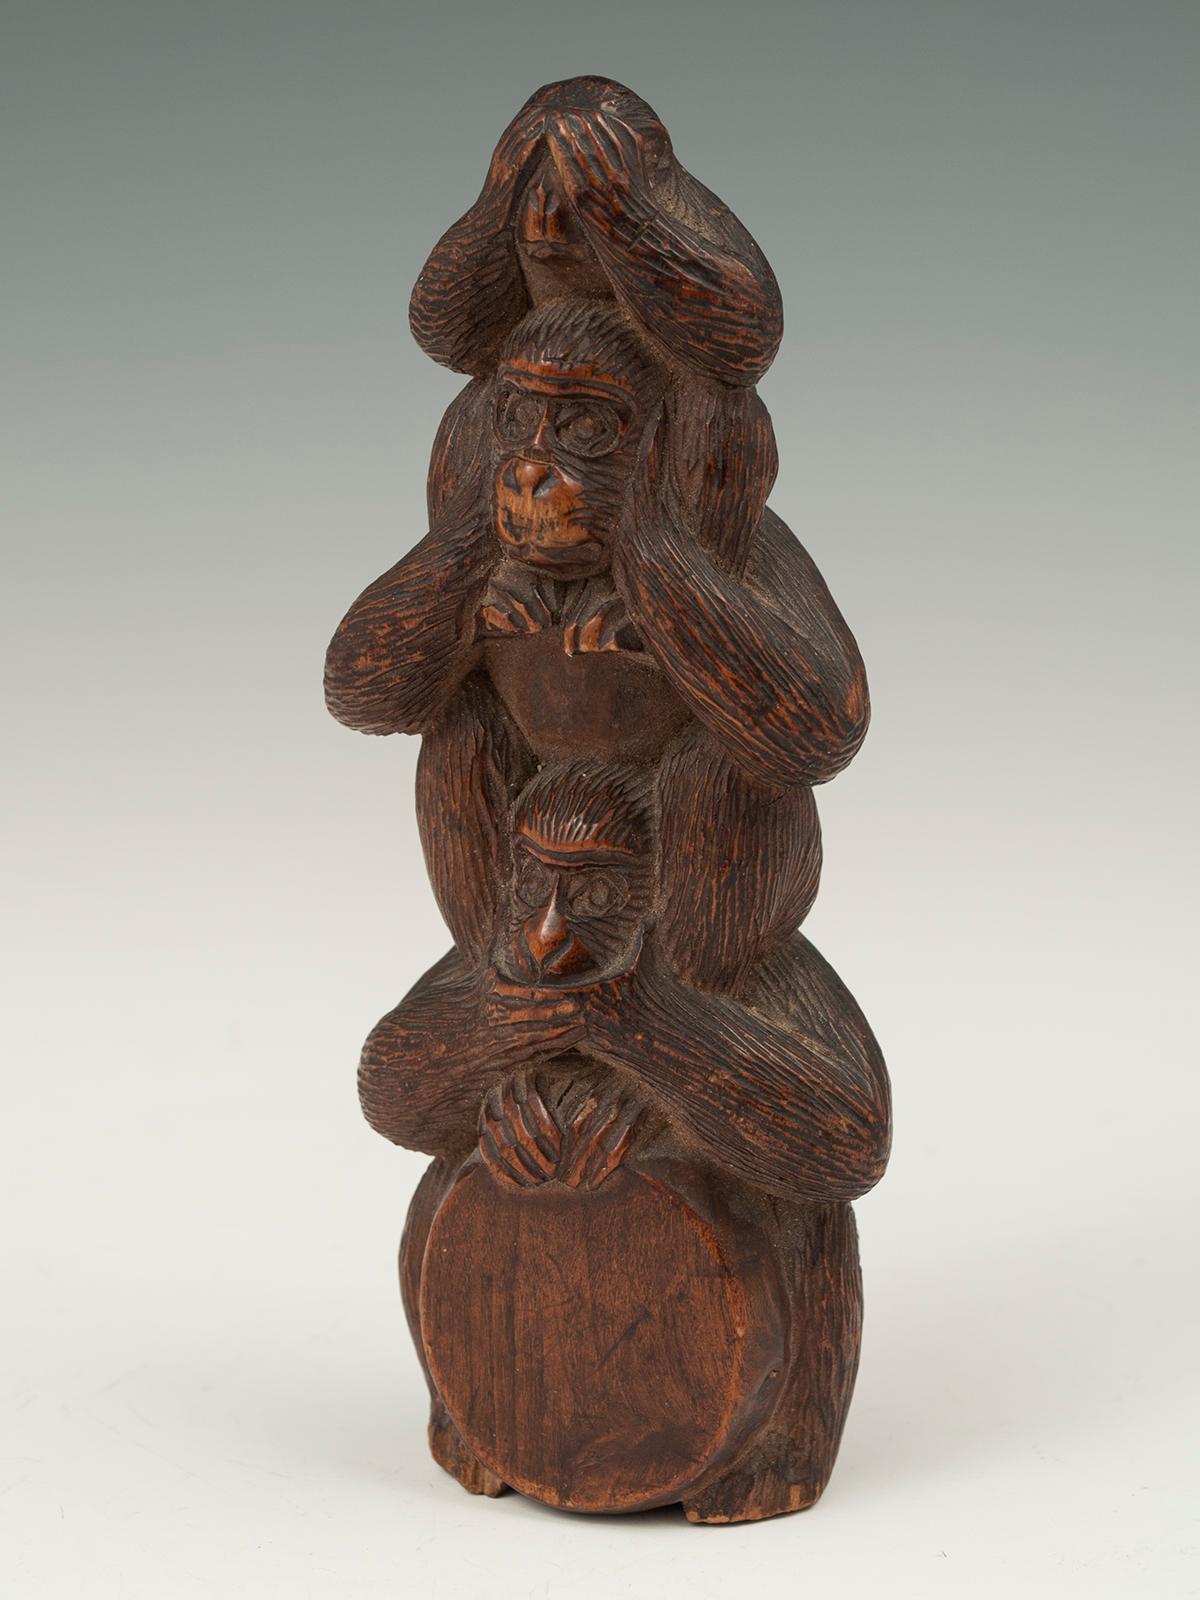 Hand-Carved Meiji Period Wood Stacked Monkey TOTEM, Japan